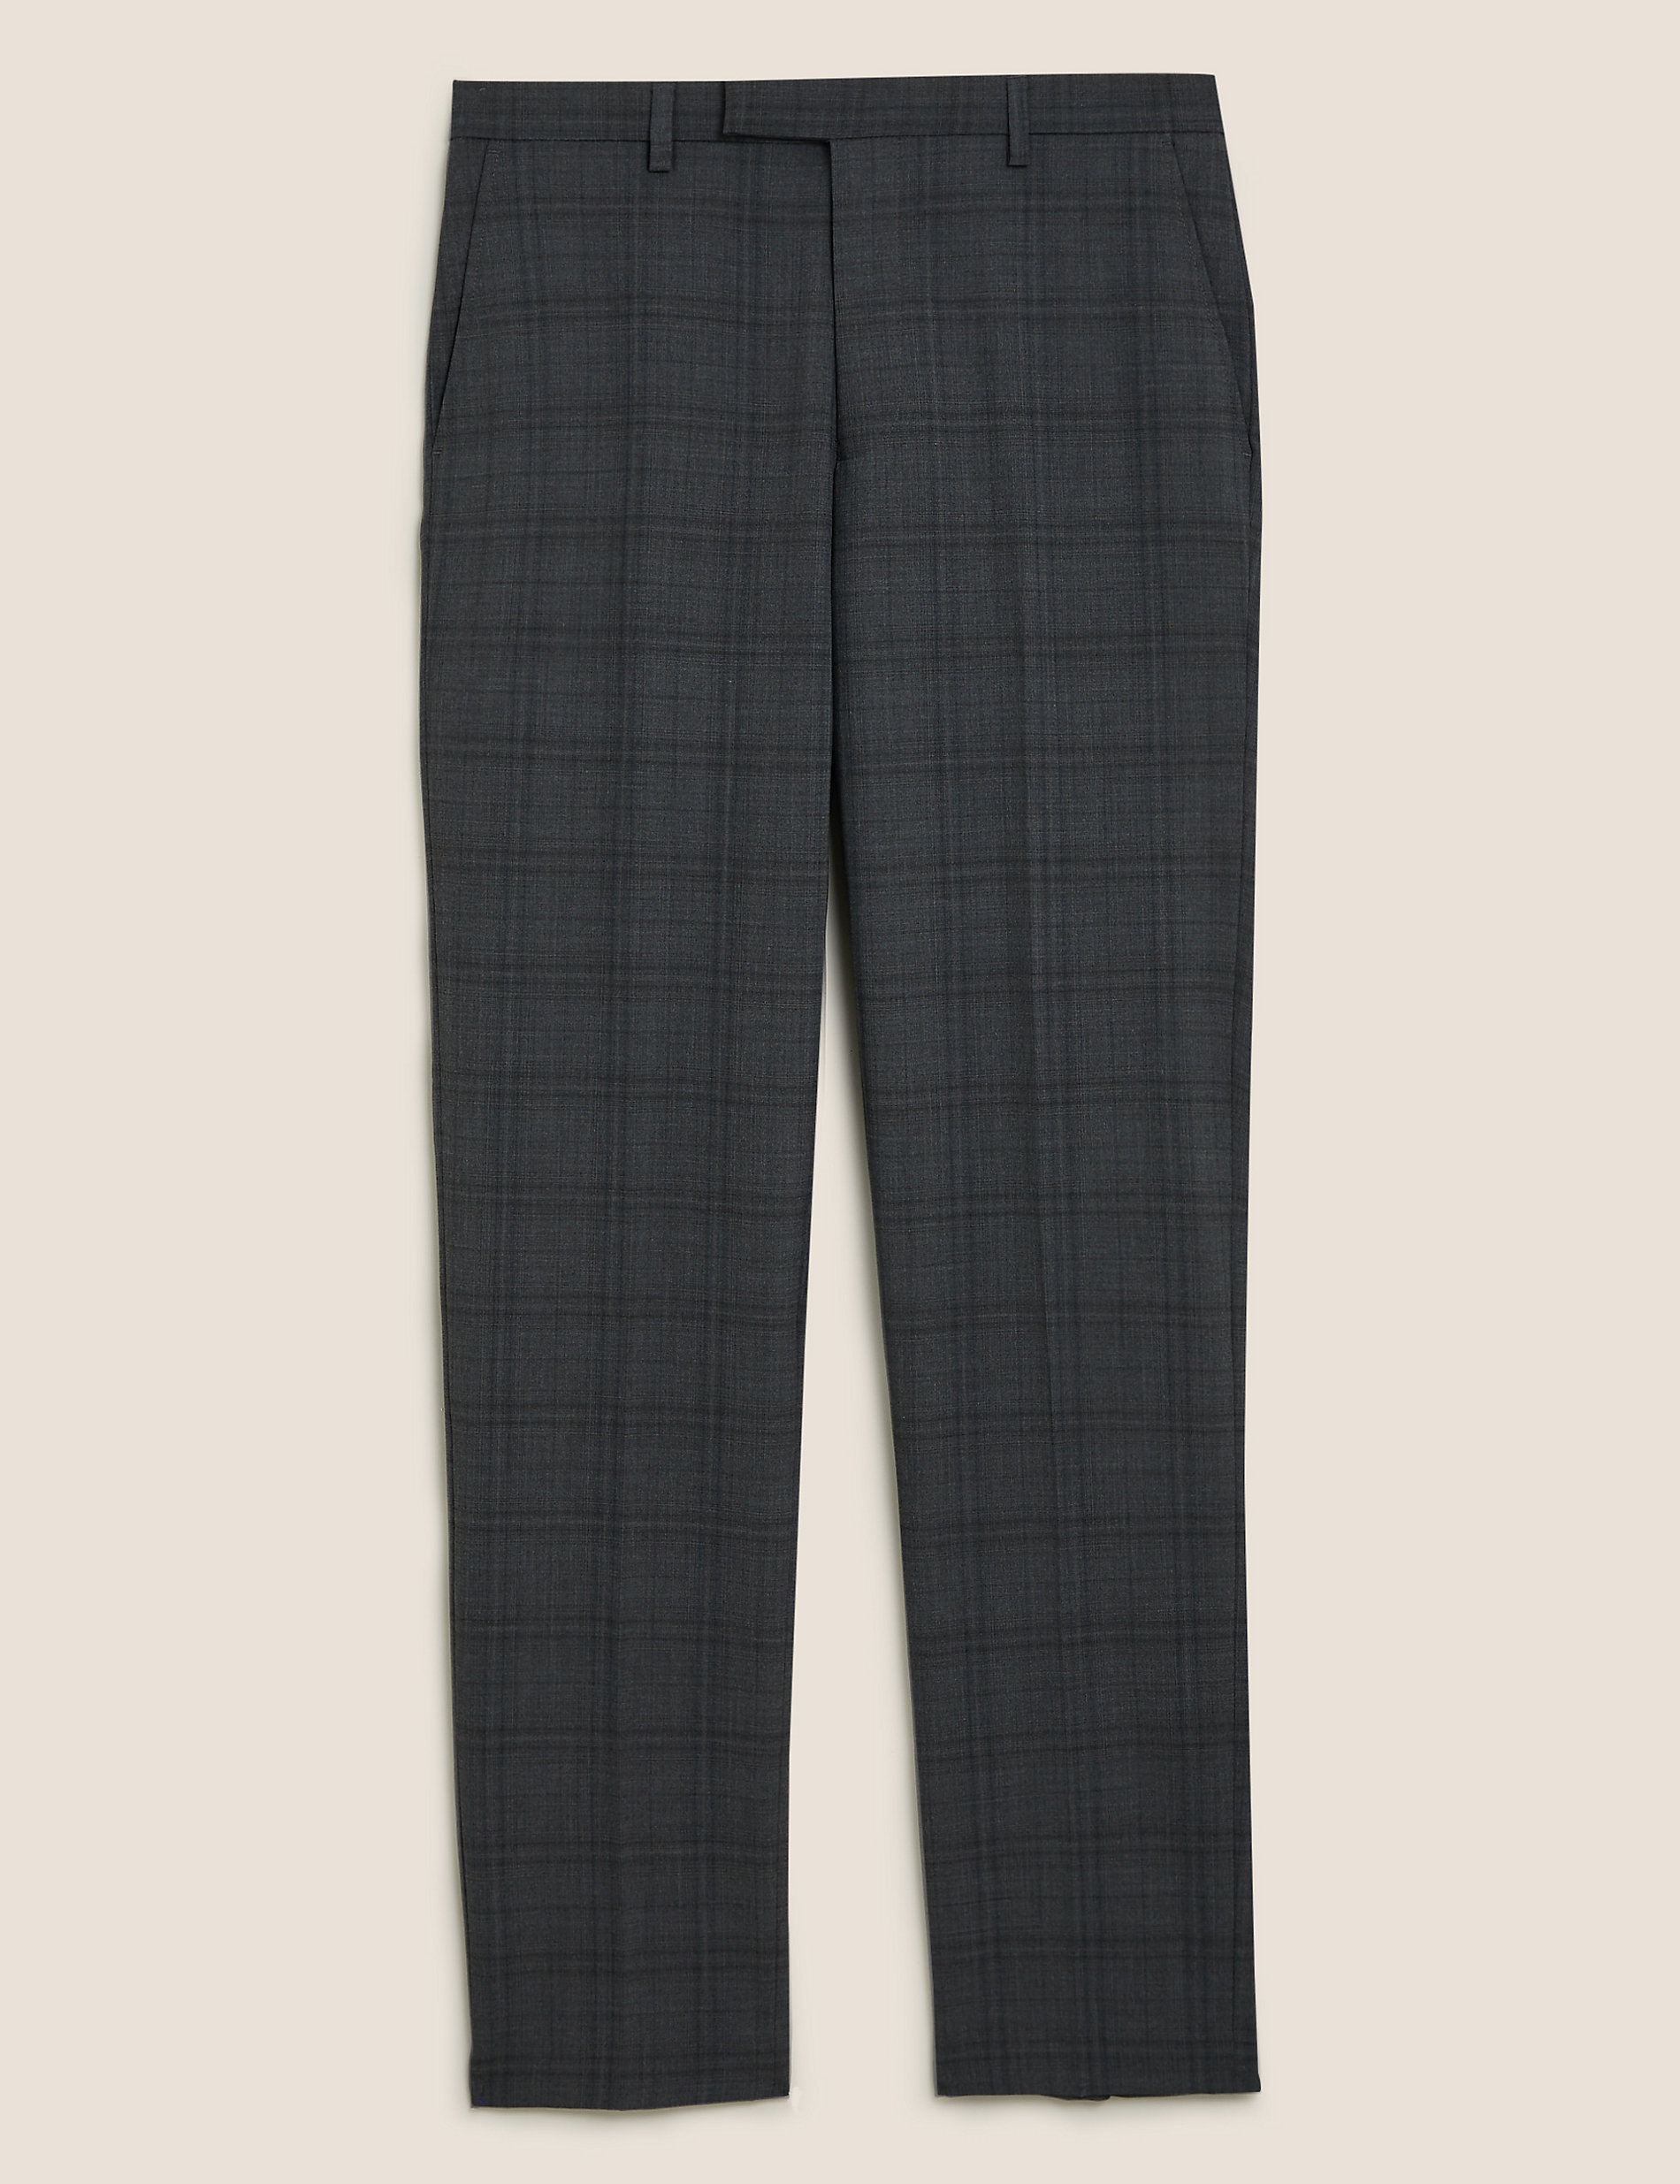 Charcoal Tailored Fit Wool Blend Check Trousers